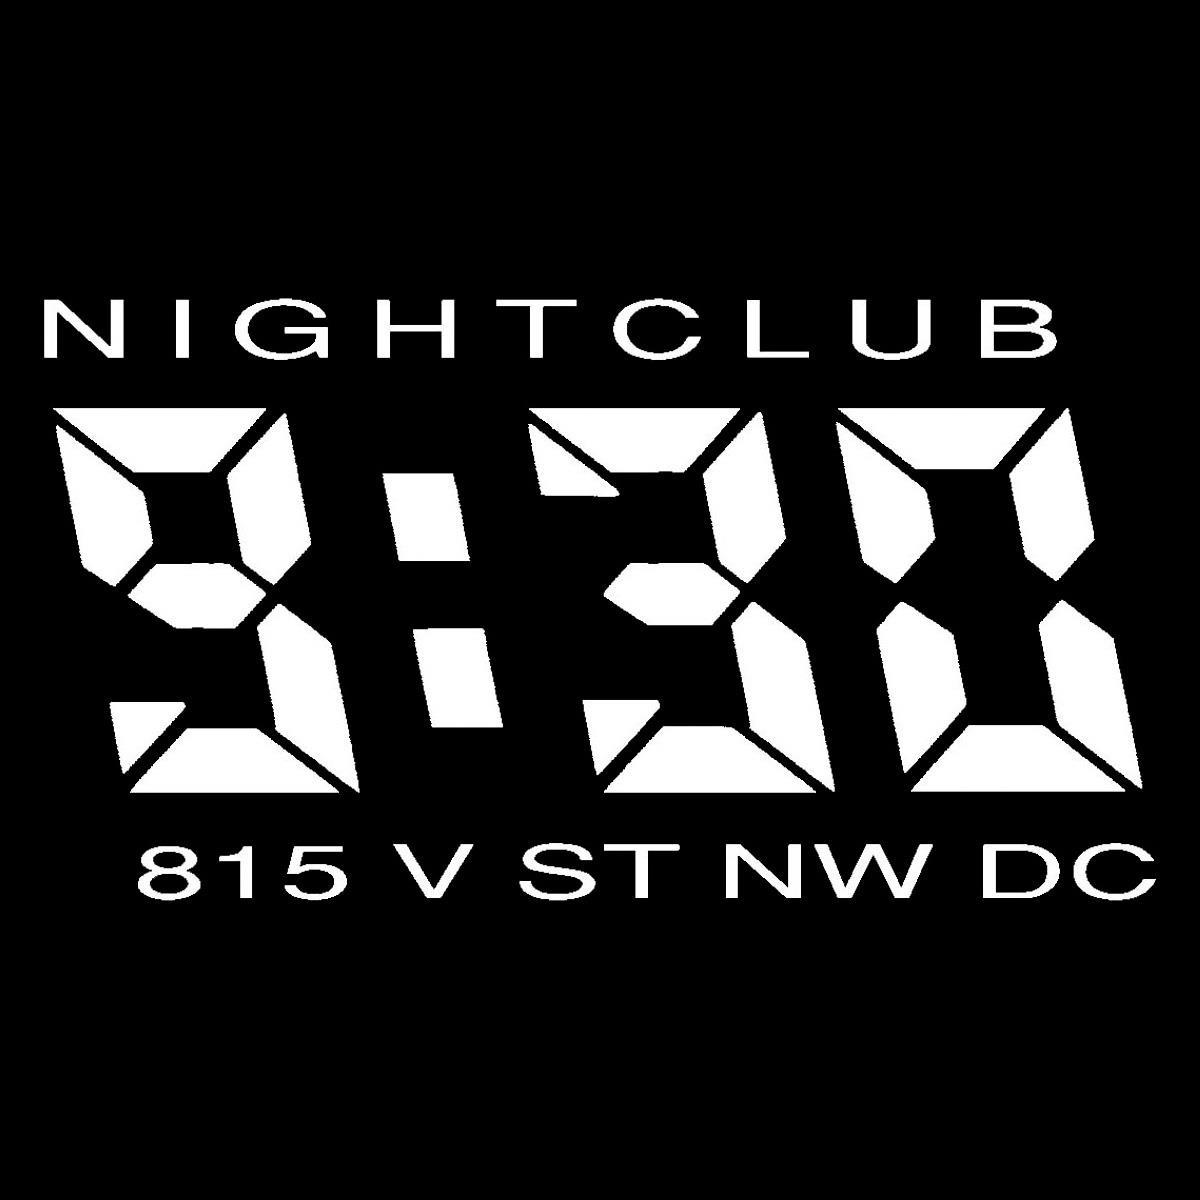 9:30 Club Events Calendar and Tickets